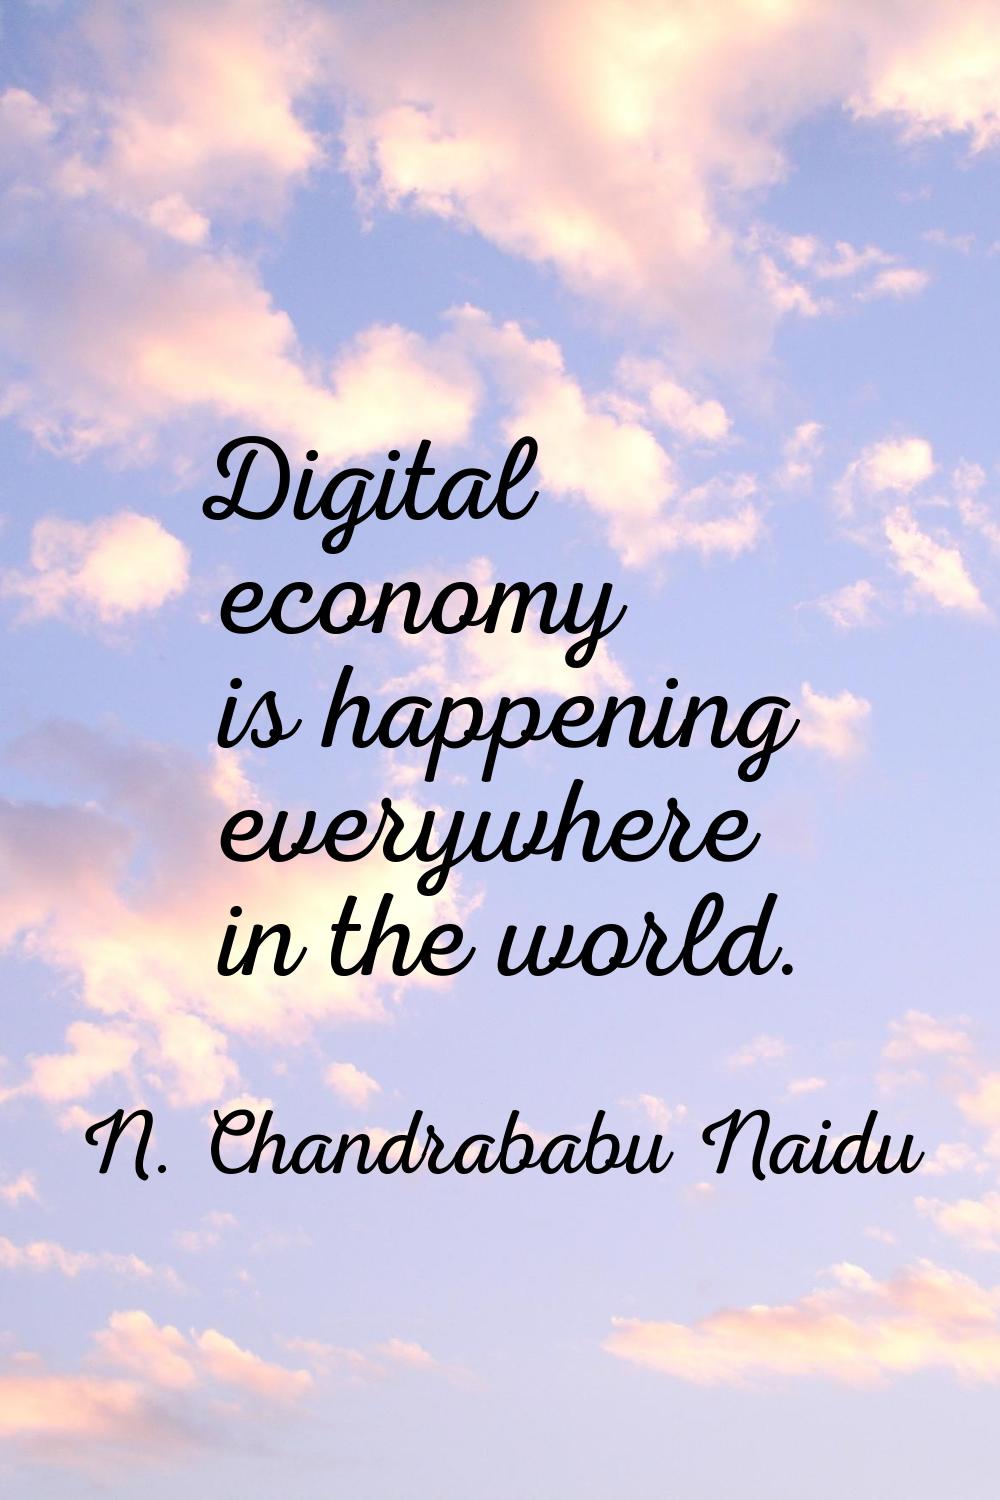 Digital economy is happening everywhere in the world.